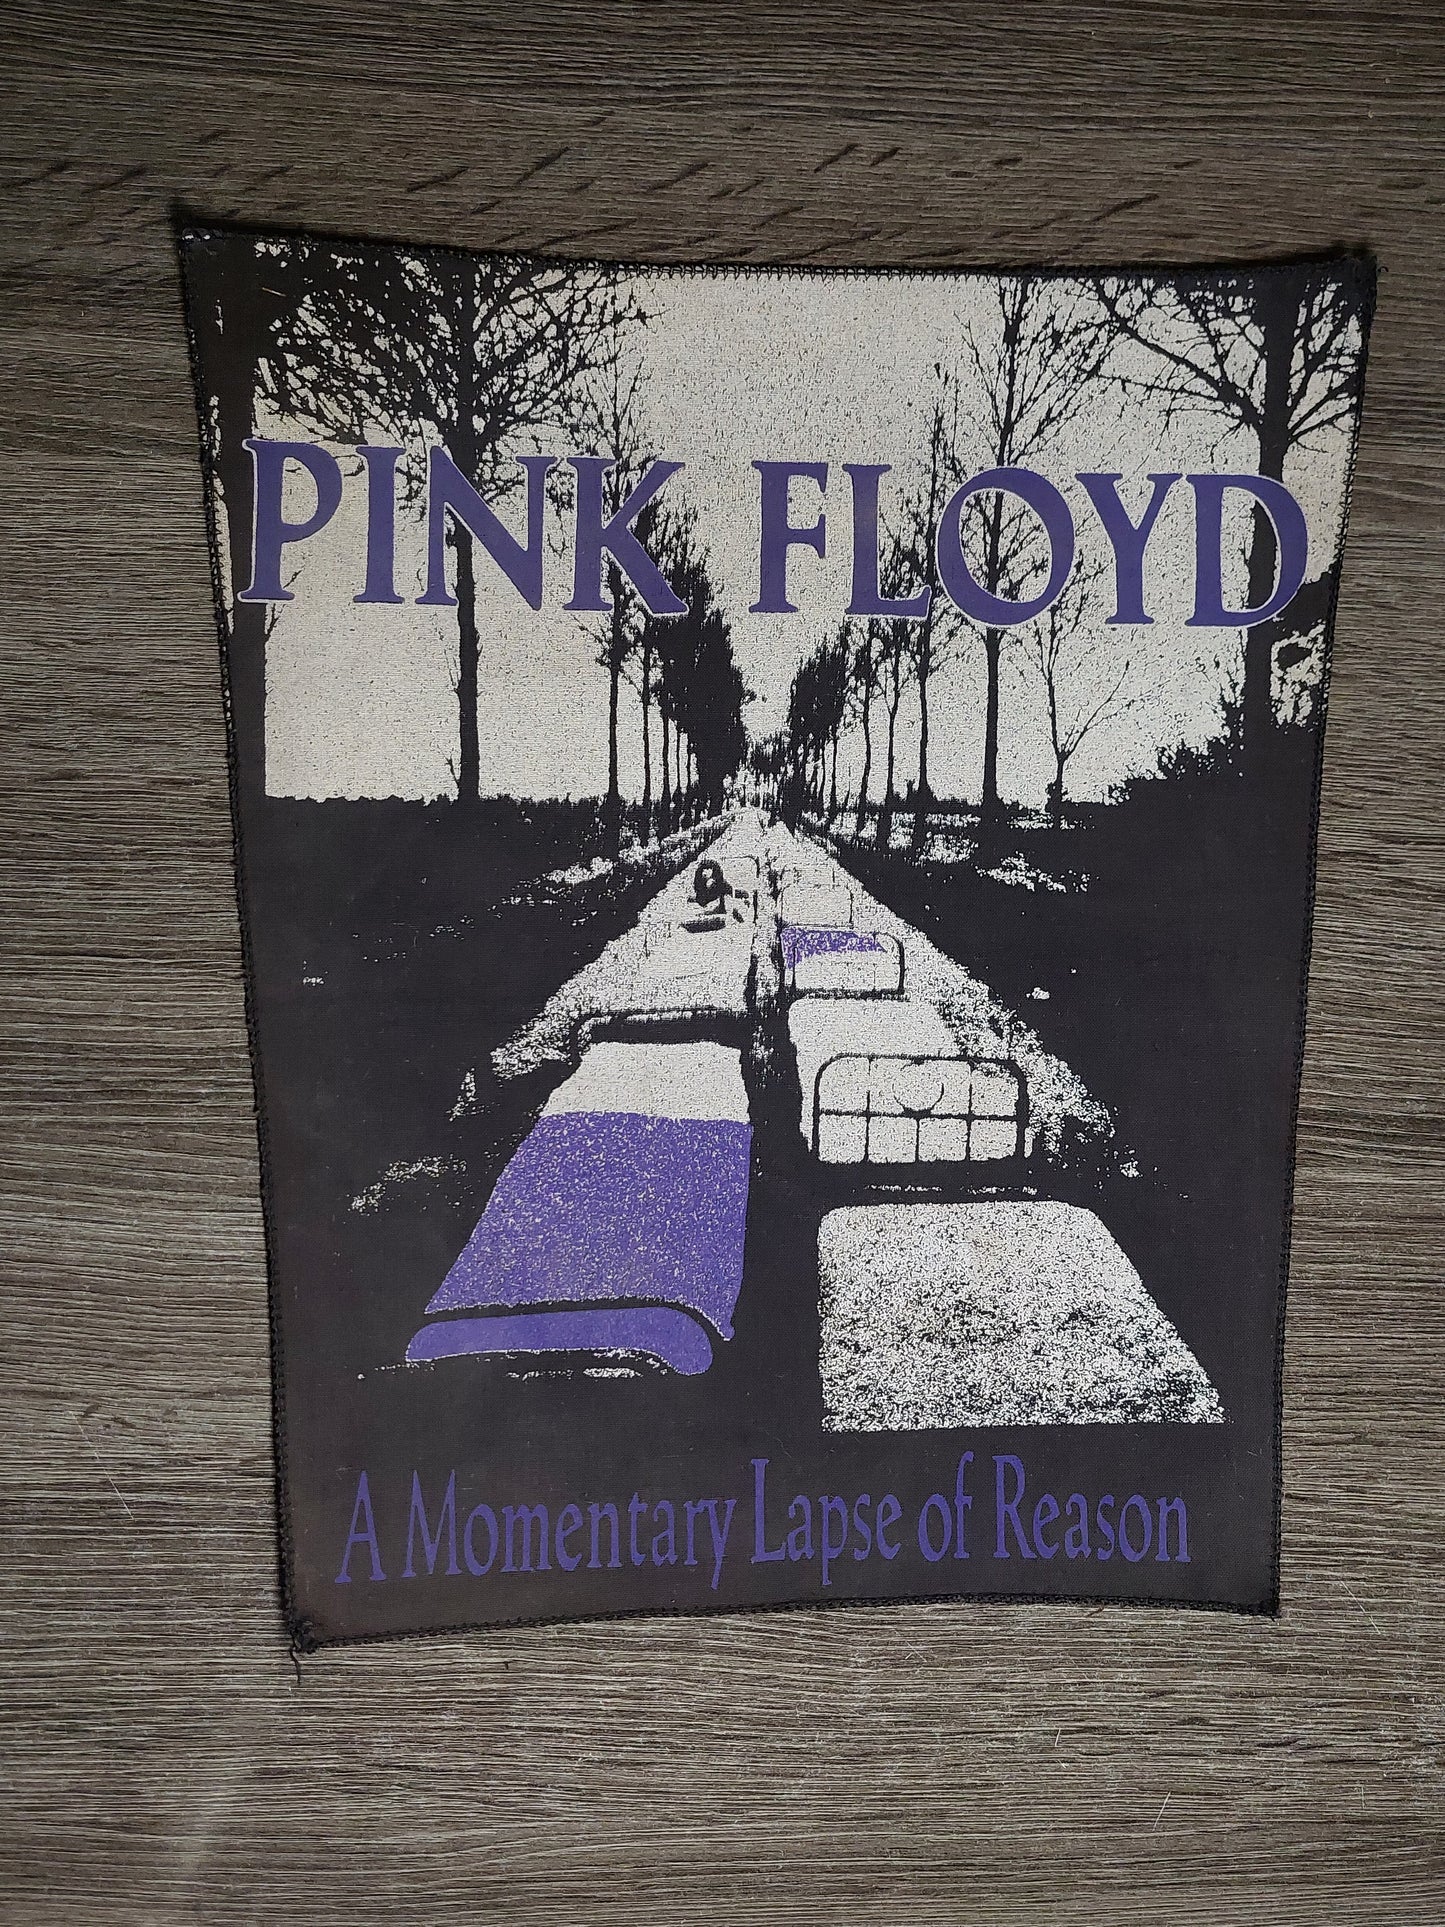 Pink floyd - A momentary lapse of reason backpatch